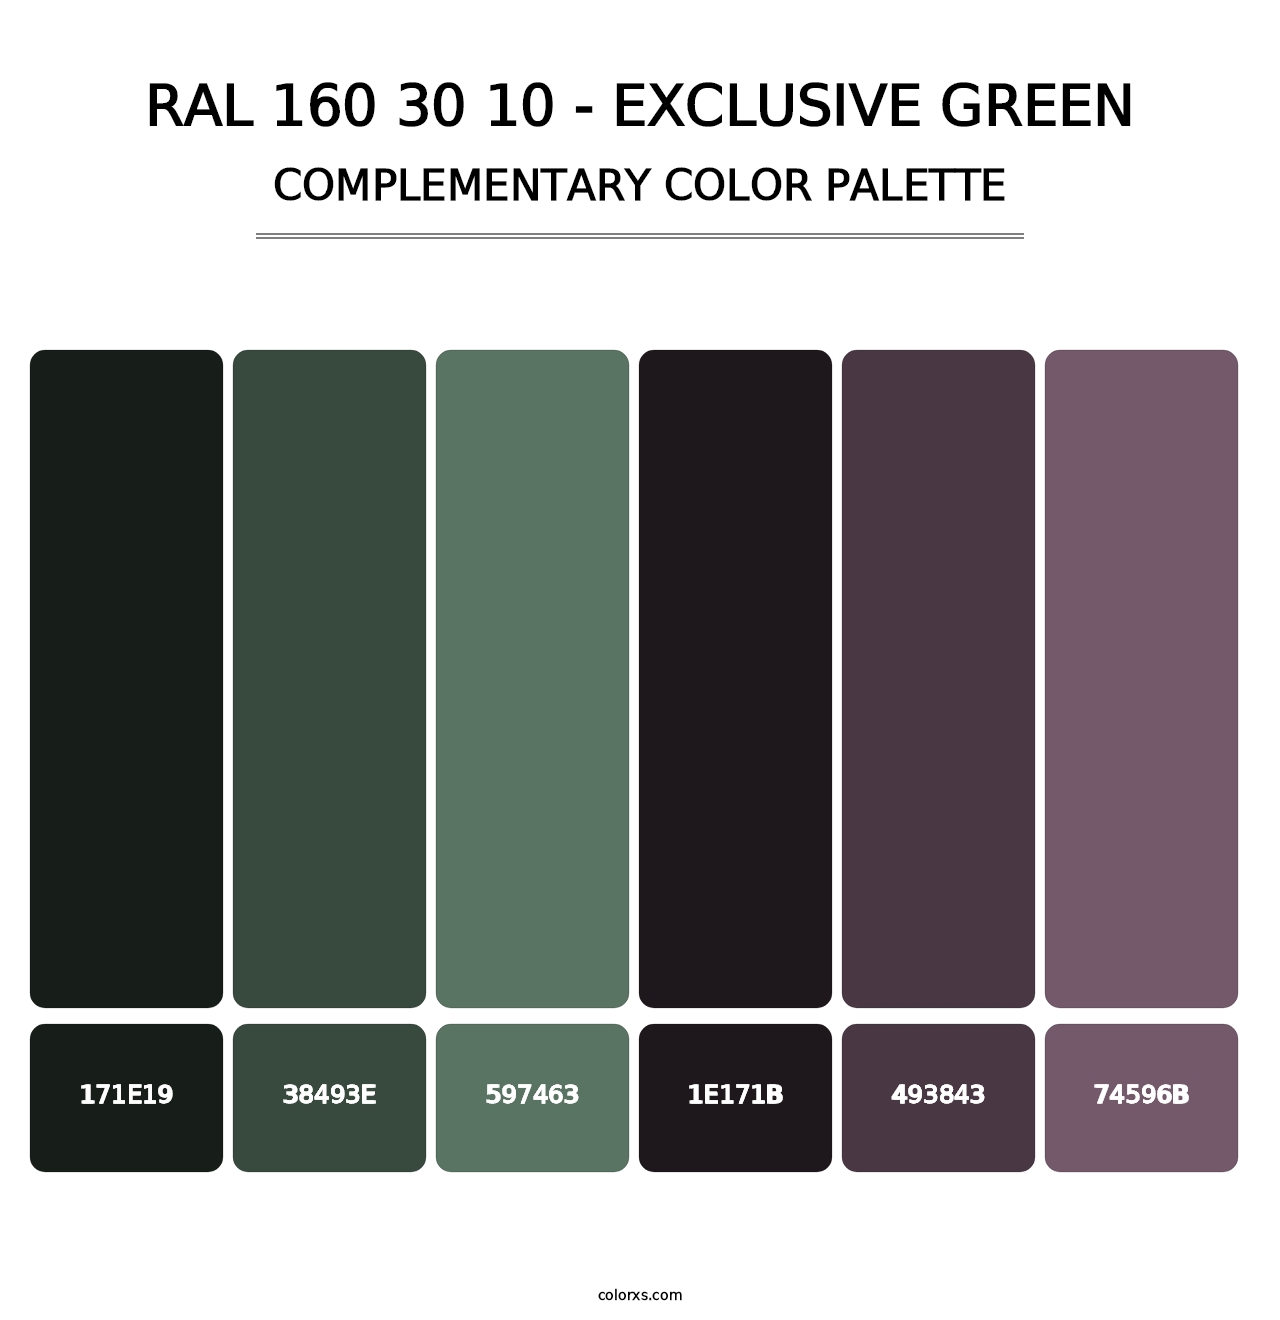 RAL 160 30 10 - Exclusive Green - Complementary Color Palette